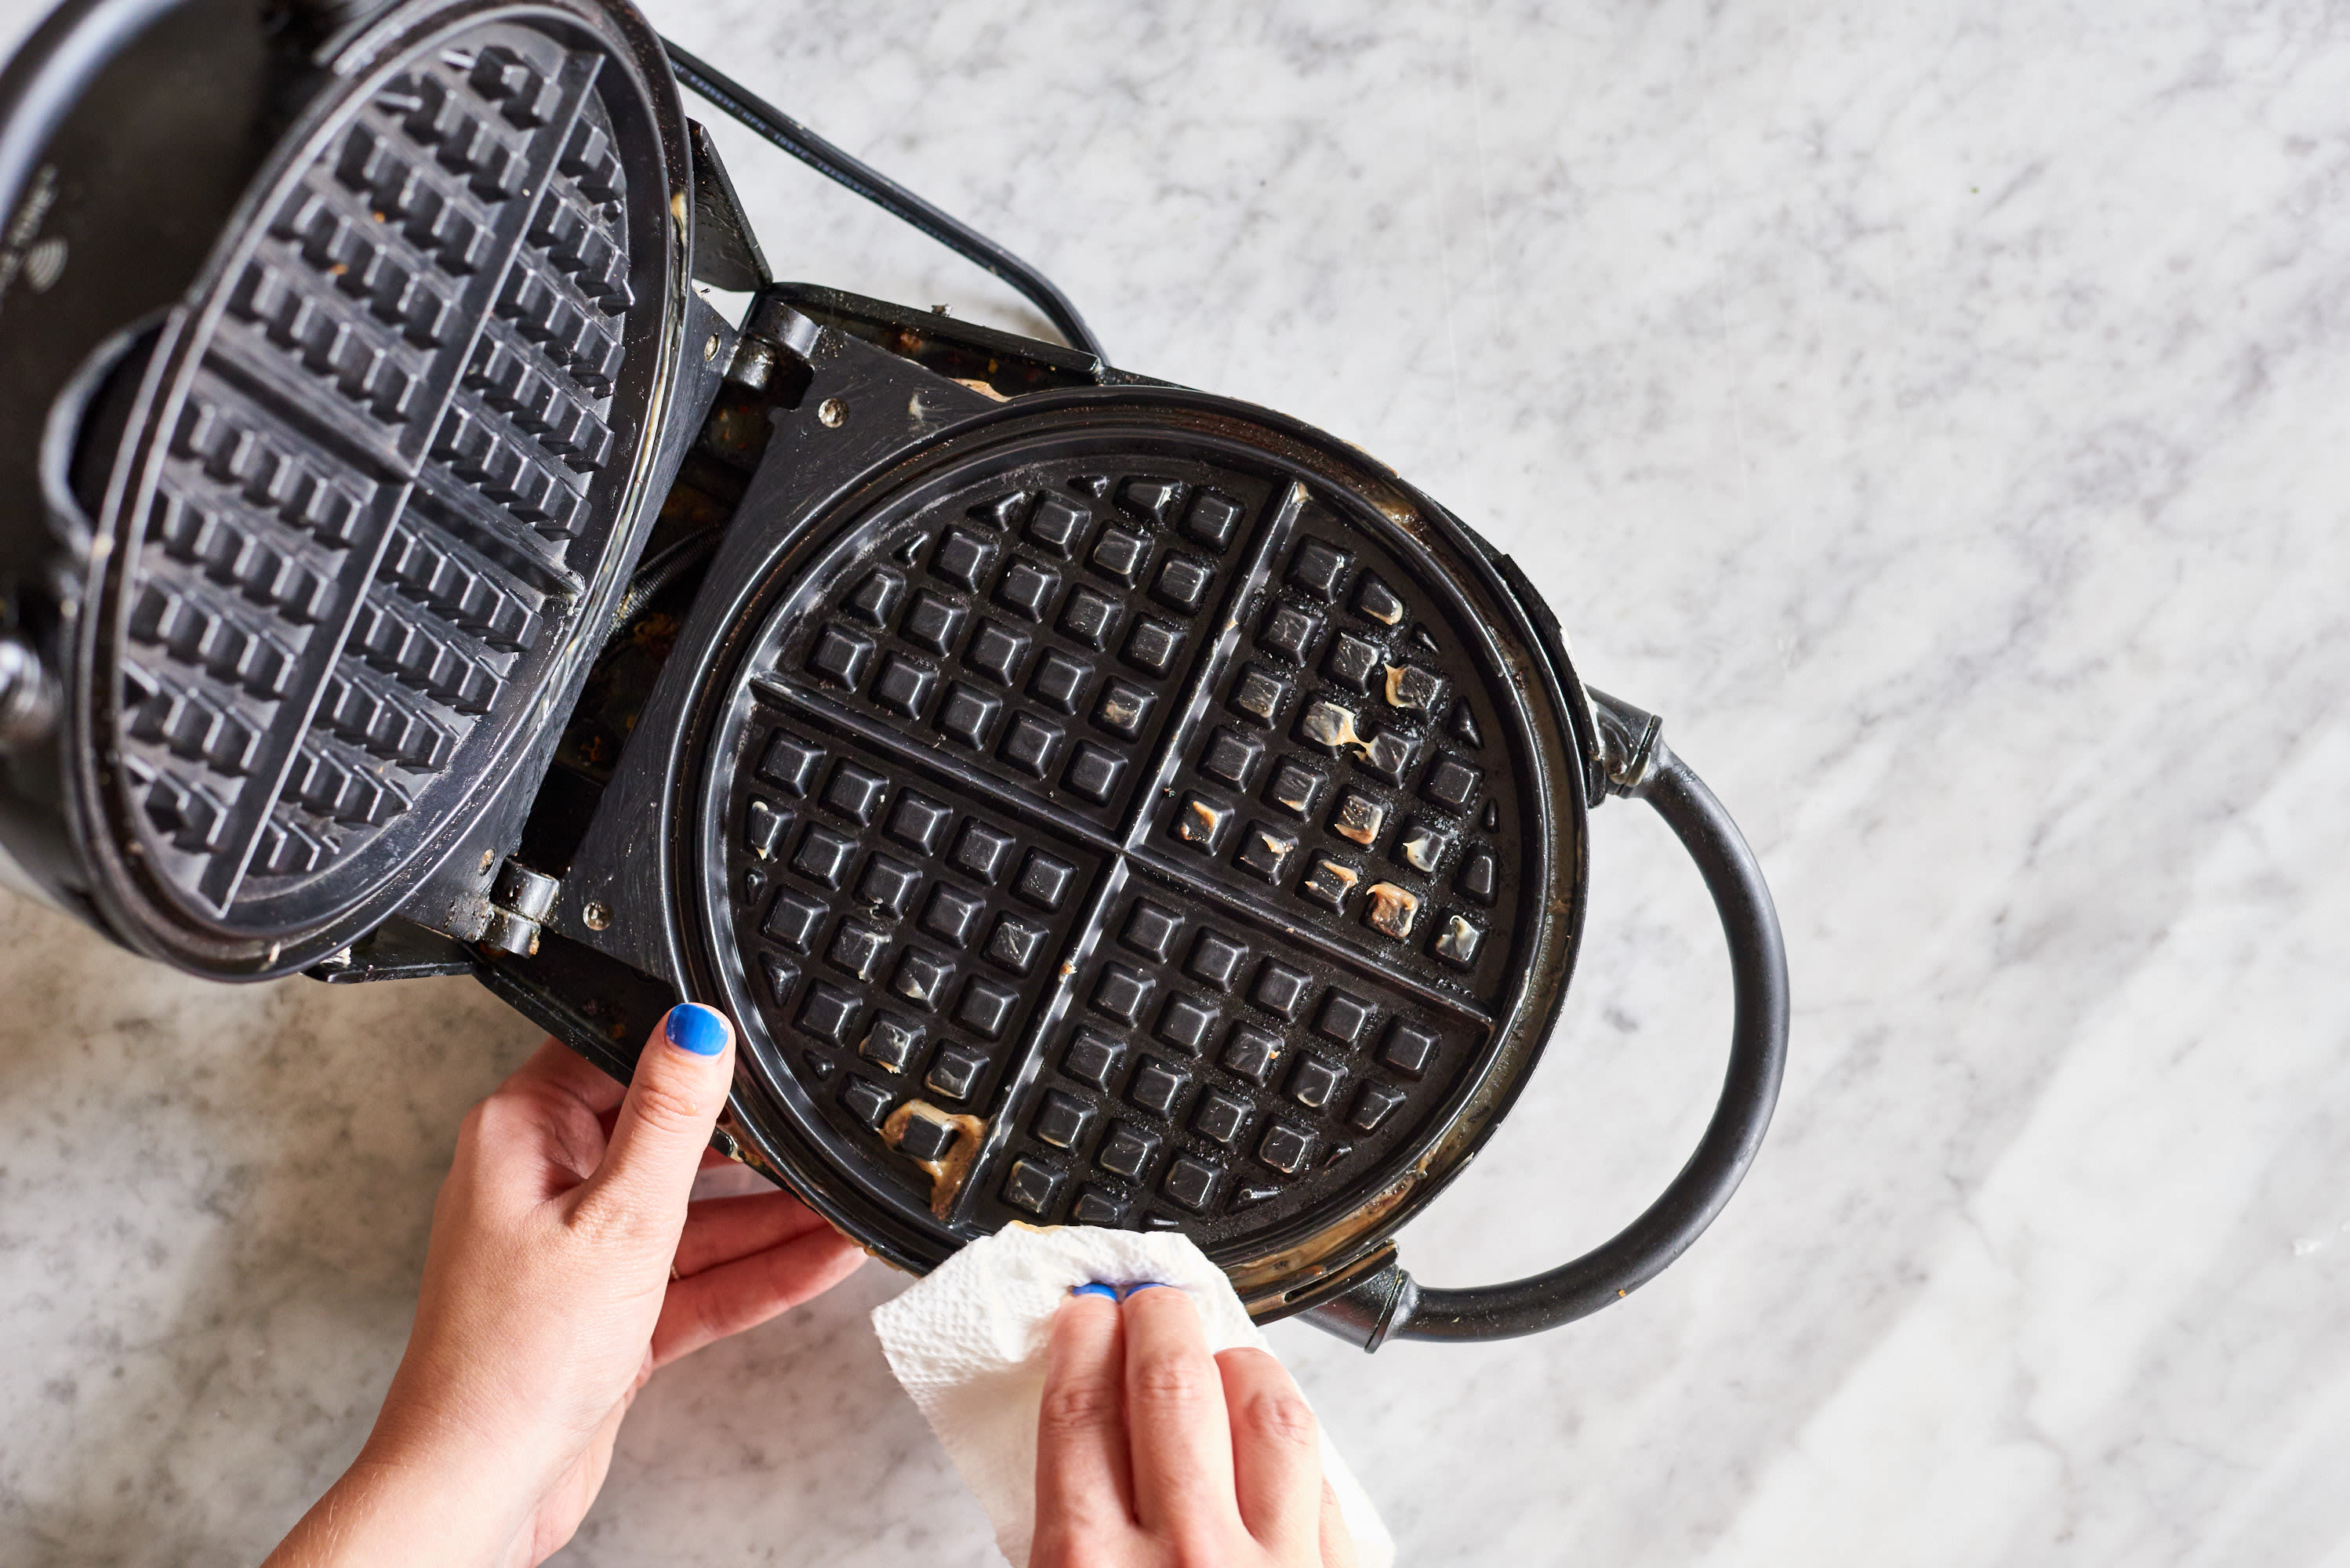 https://cdn.apartmenttherapy.info/image/upload/v1566580118/k/Photo/Lifestyle/2019-09-how-to-clean-a-waffle-iron/How-to-Clean-an-Impossibly-Gross-Waffle-Iron_058.jpg